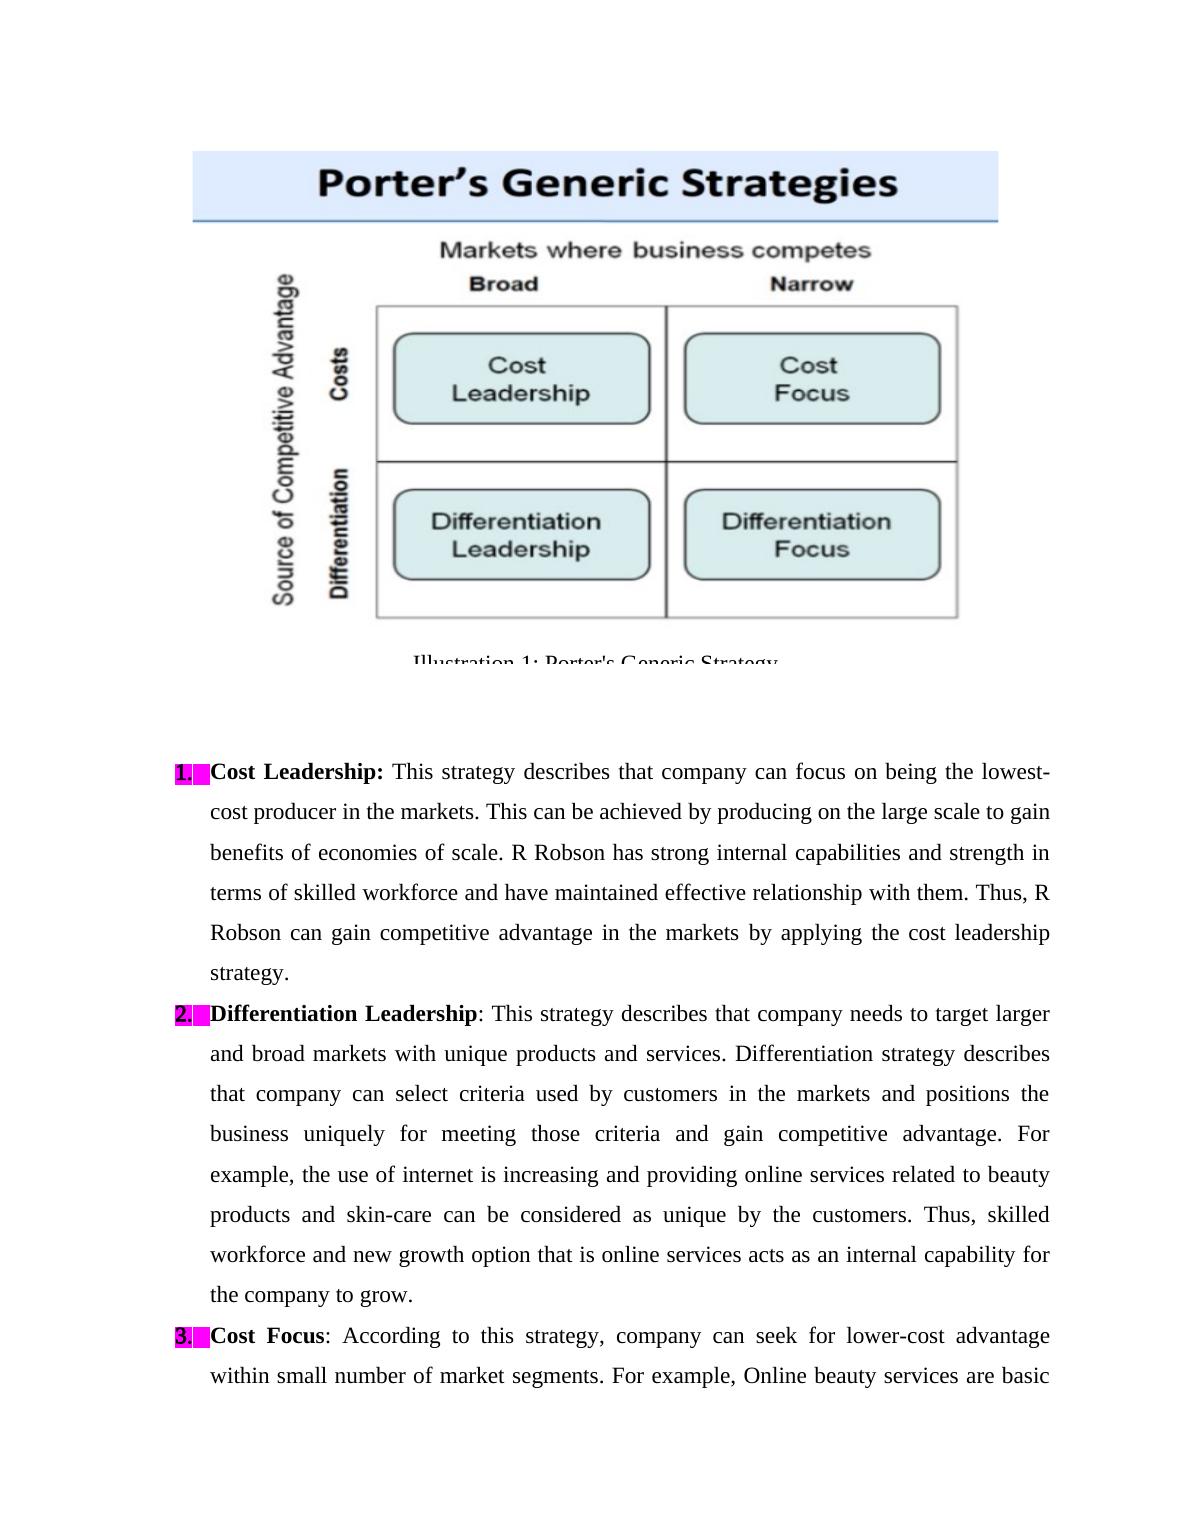 Planning For Growth And Opportunities (pdf)_4